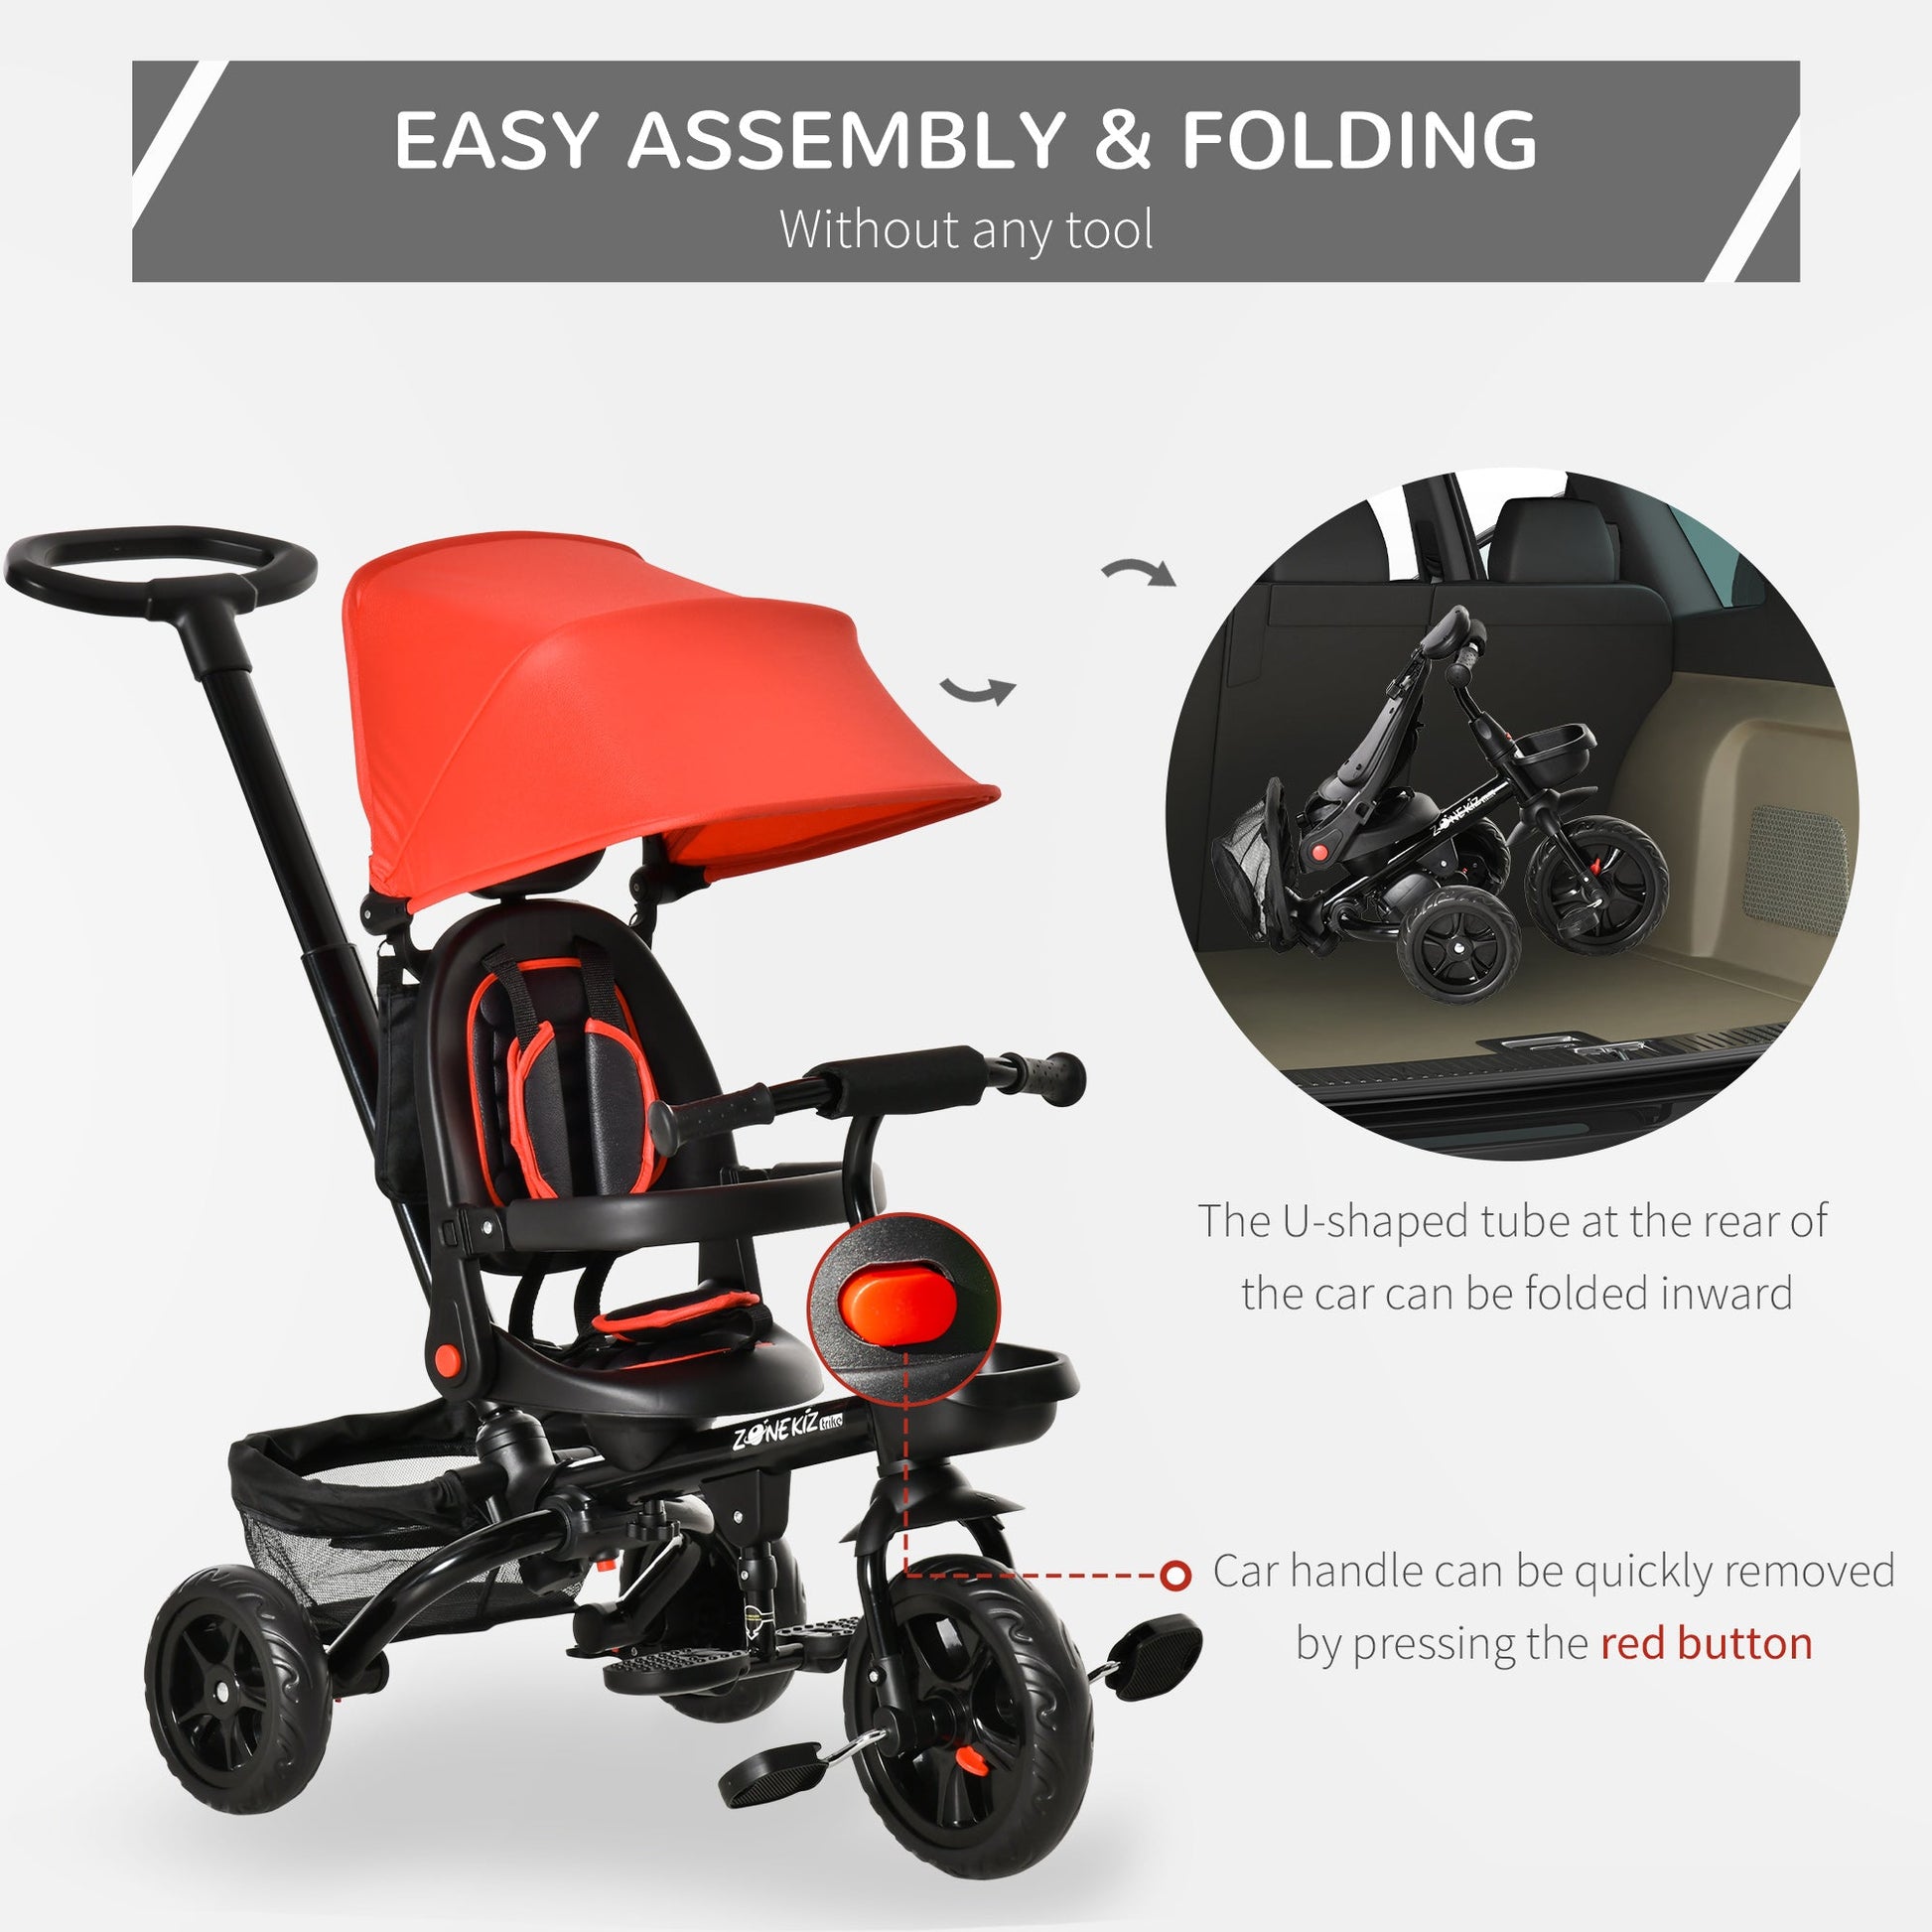 Baby Tricycle 4 In 1 Trike w/ Reversible Angle Adjustable Seat Removable Handle Canopy Handrail Belt Storage Footrest Brake Clutch for 1-5 Years Old Red at Gallery Canada